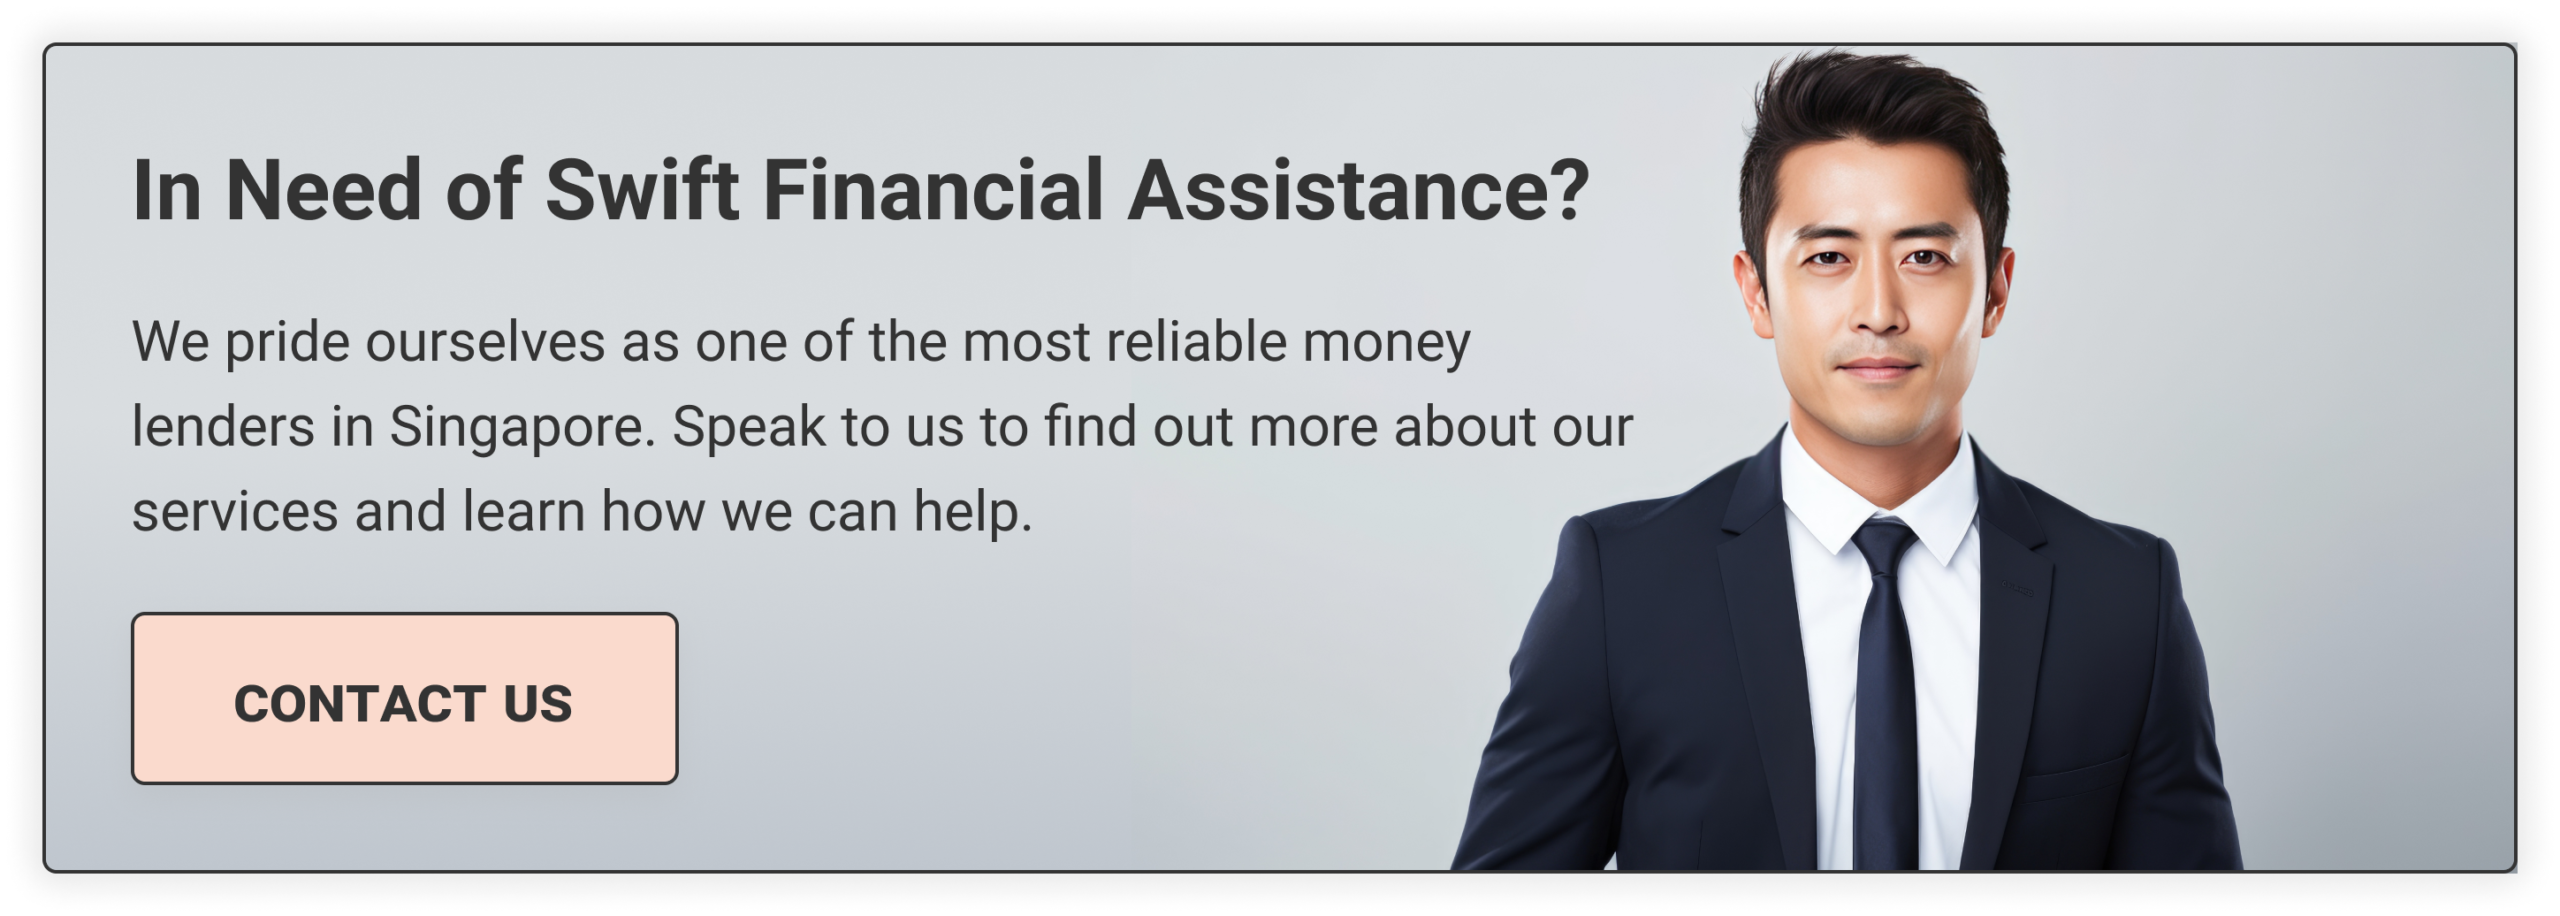 In Need of Swift Financial Assistance